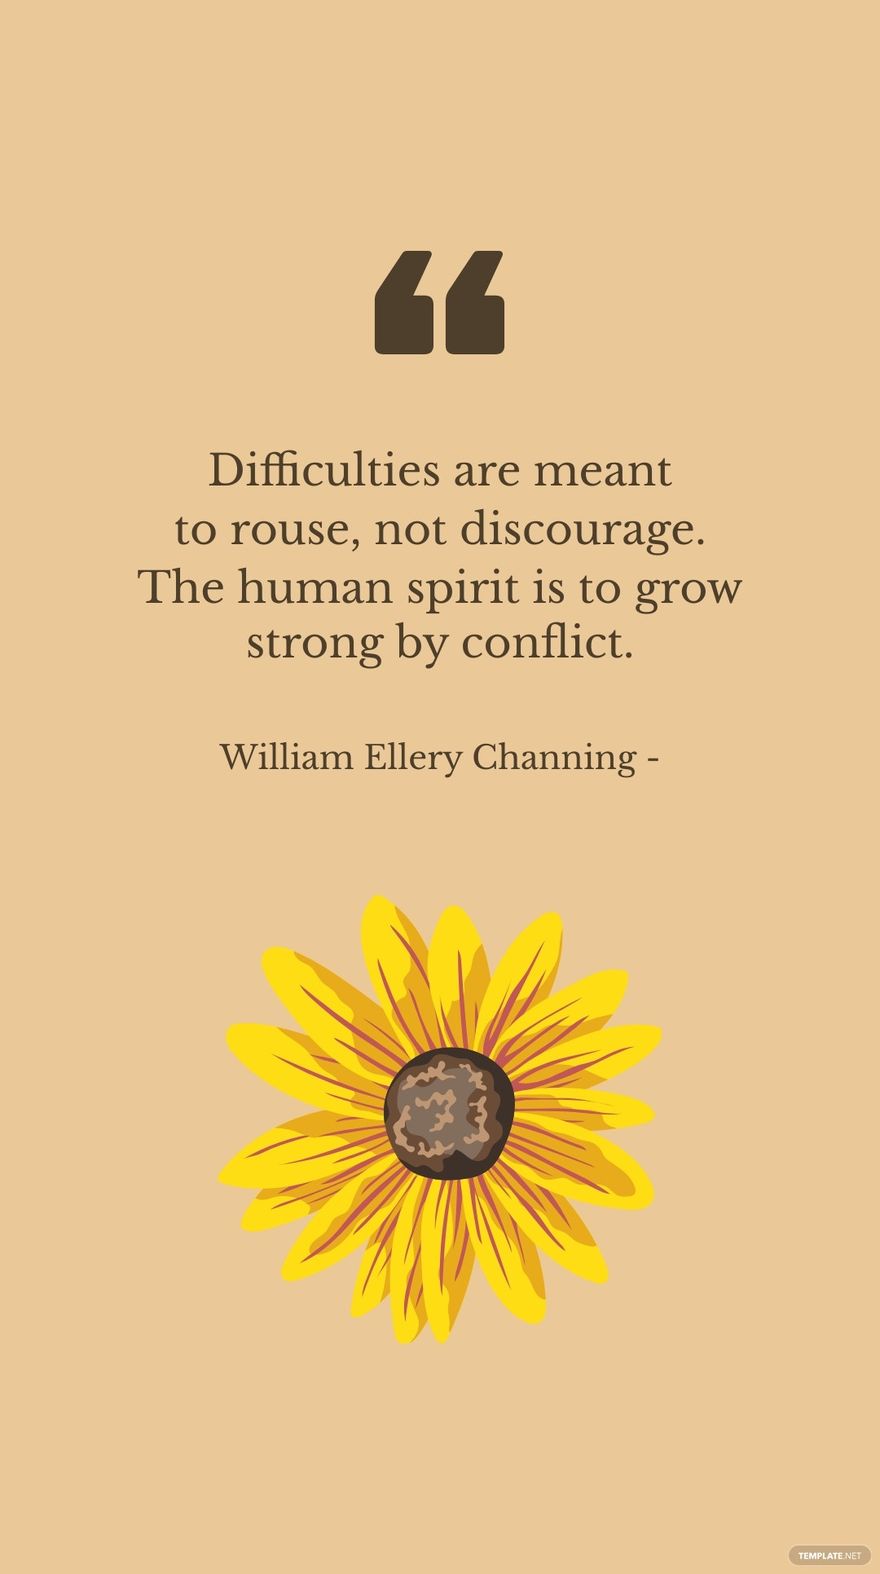 William Ellery Channing - Difficulties are meant to rouse, not discourage. The human spirit is to grow strong by conflict.